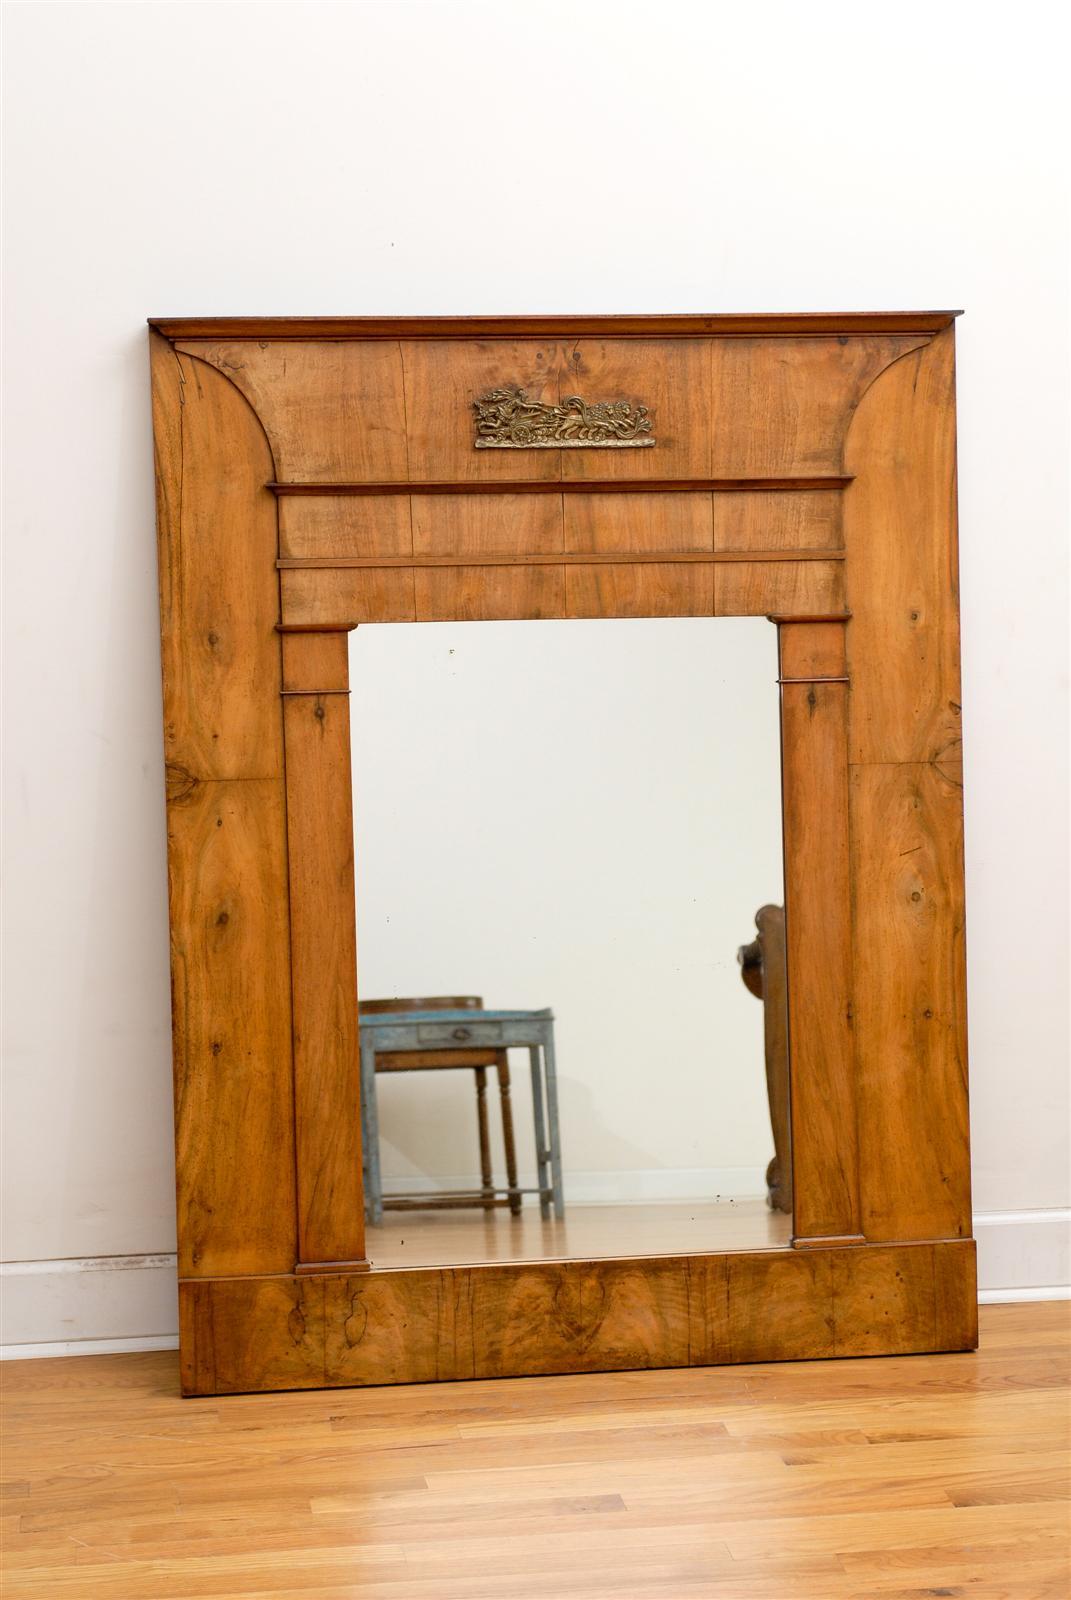 An Austrian Biedermeier tall and wide Trumeau mirror with mythological bronze mount from the mid-19th century. This Biedermeier mirror features a clean, linear wooden frame surrounding a clear glass, flanked with two Doric style pilasters. The inner